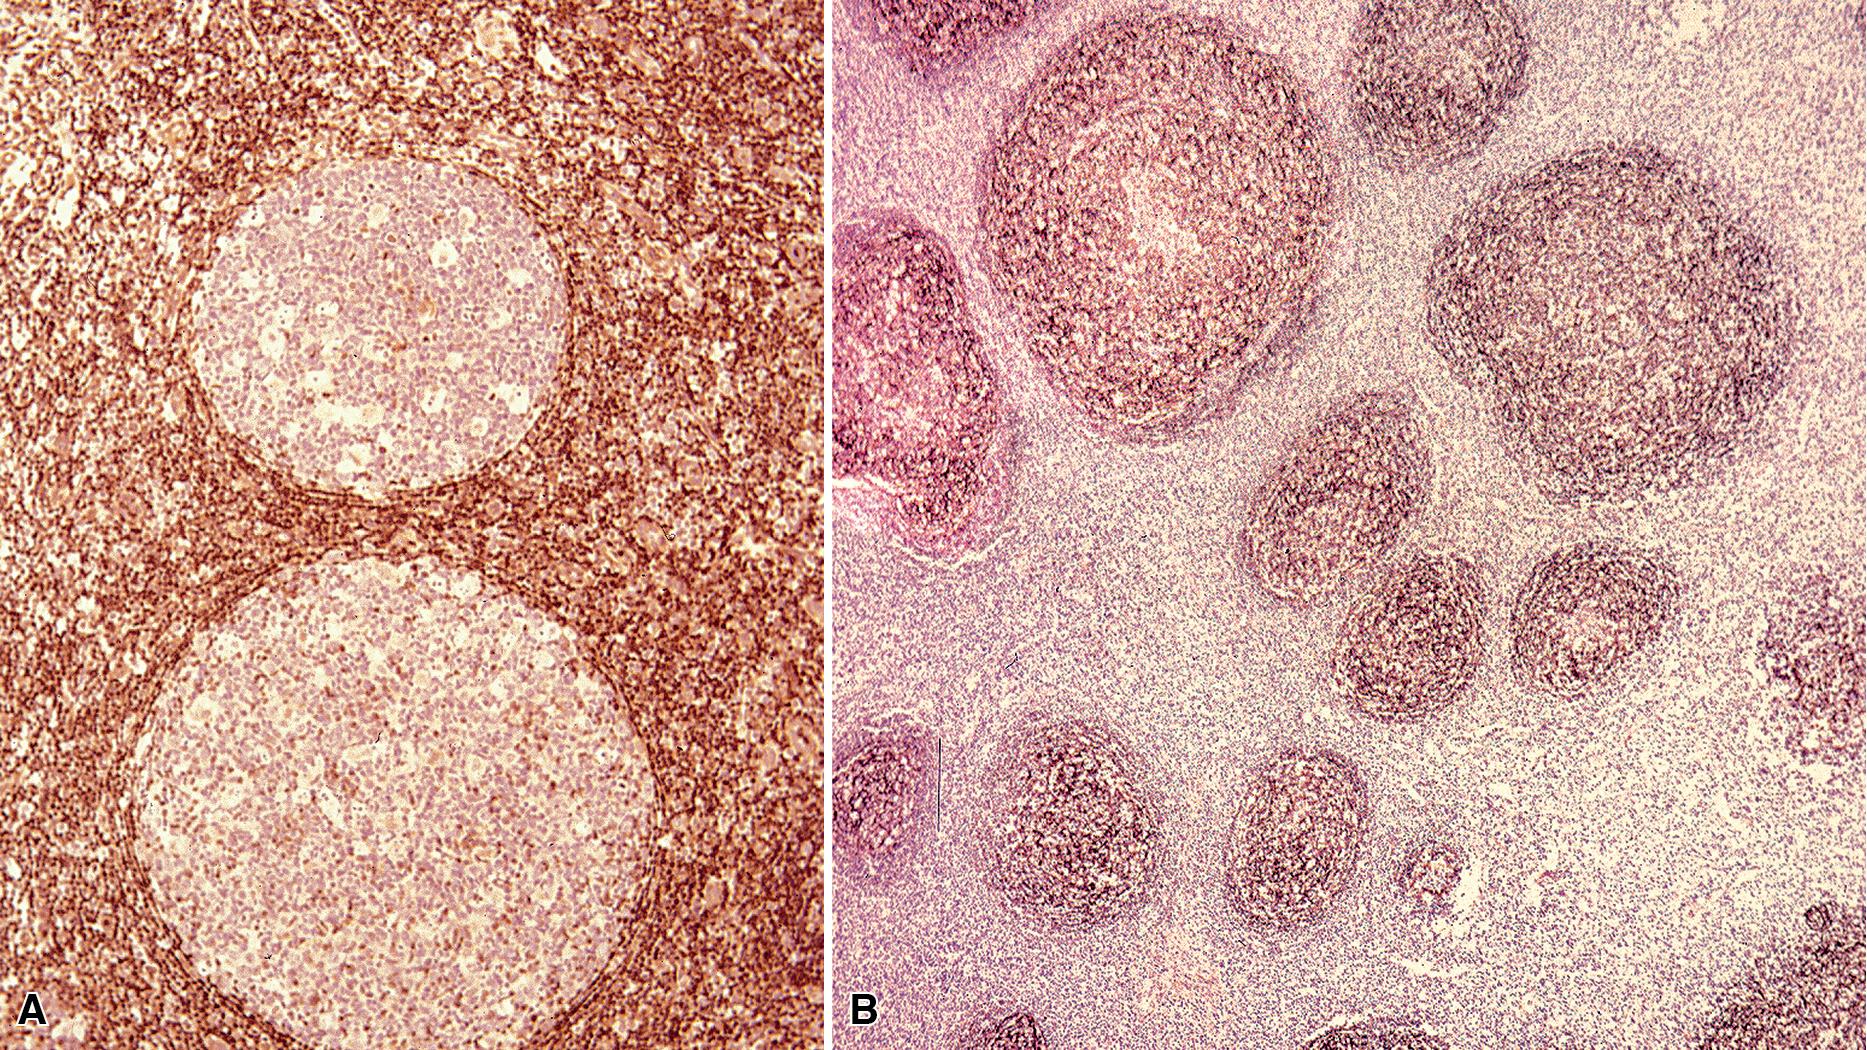 Figure 16.2, The normal immune-architecture of bronchiolar lymphoid tissue follows that seen elsewhere. Germinal centers are negative for bcl2 (A) and rich in CD21+ follicular dendritic cells (B) and bcl6+ centrocytes and centroblasts (C). (D) At low power, some of the follicles are polarized into light and dark zones. (E) At high power, there is a rich and heterogeneous mix of centrocytes and centroblasts, without a discernible increase in plasma cells or monocytoid cells. (F) It may be irregular in contour, but an immunoglobulin D–positive mantle is often present.